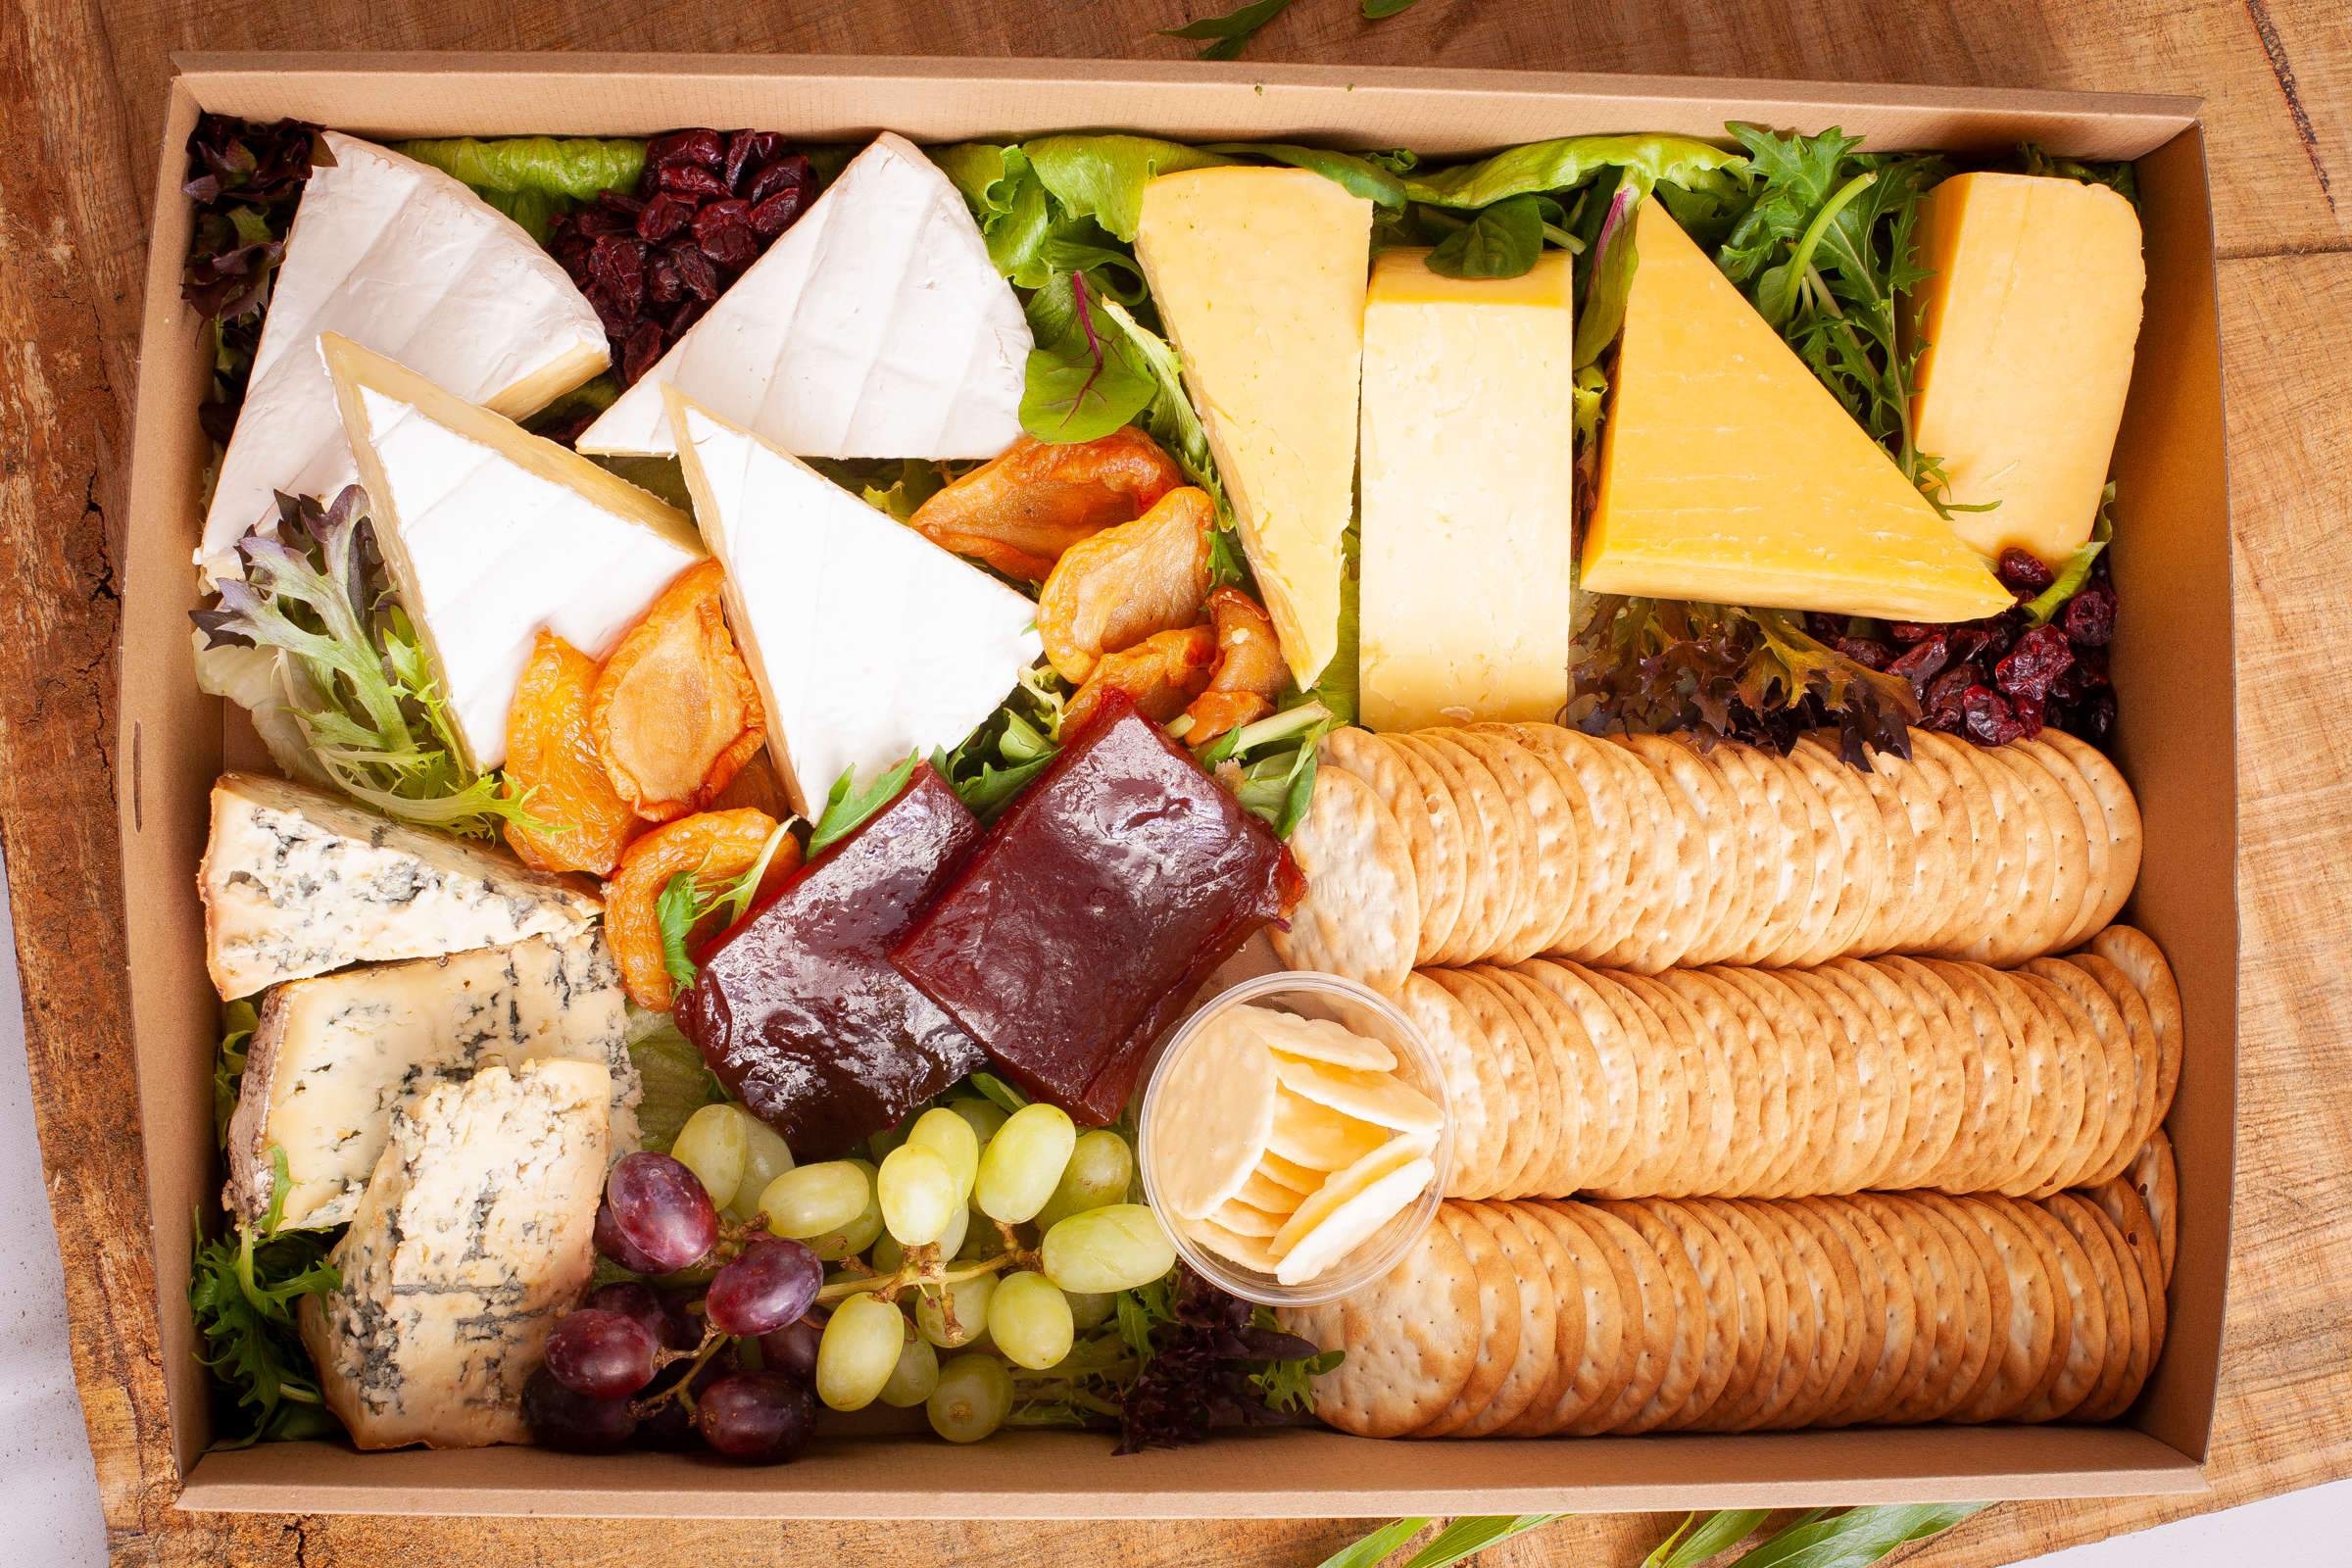 Tasmanian cheese box including brie, Blue and Cheddar with quince paste and crackers. Credit: Richard Jupe.